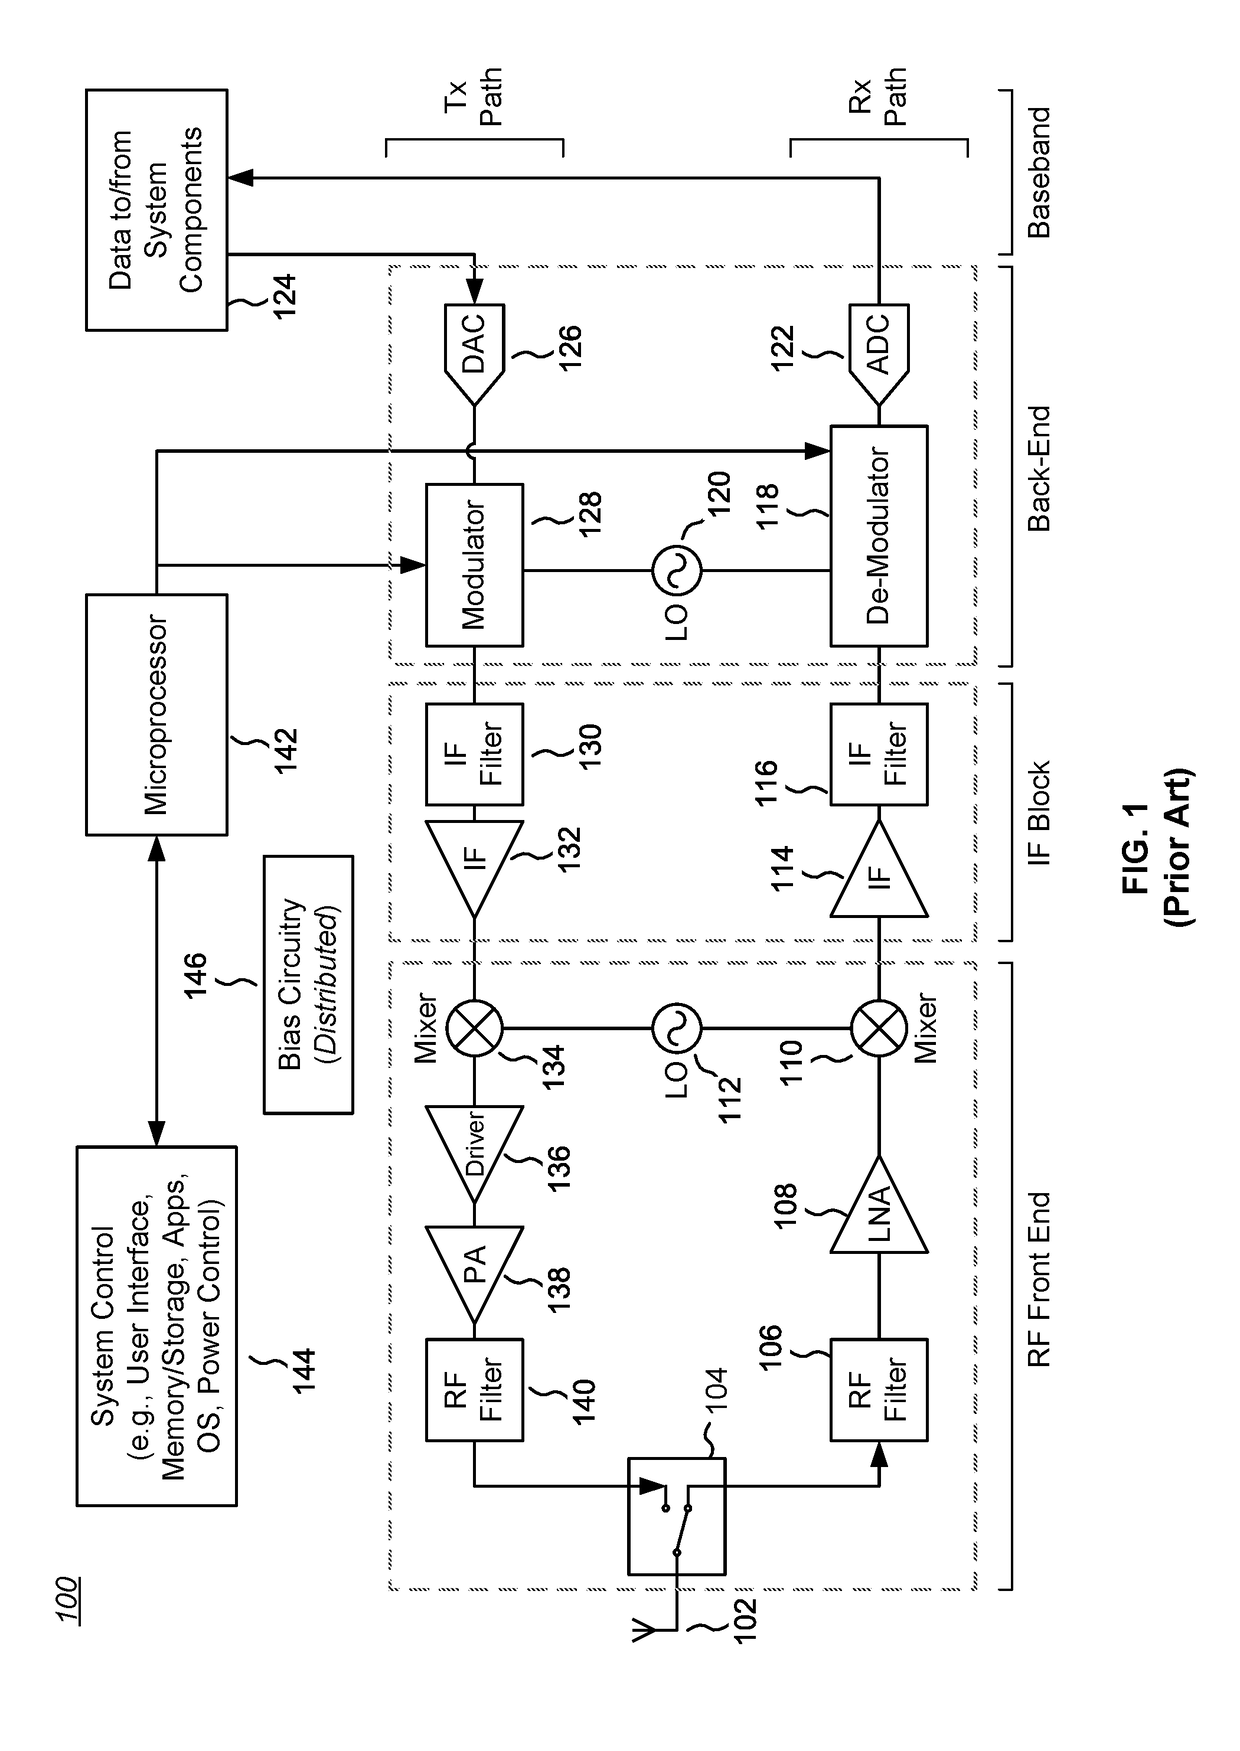 Managed Substrate Effects for Stabilized SOI FETs